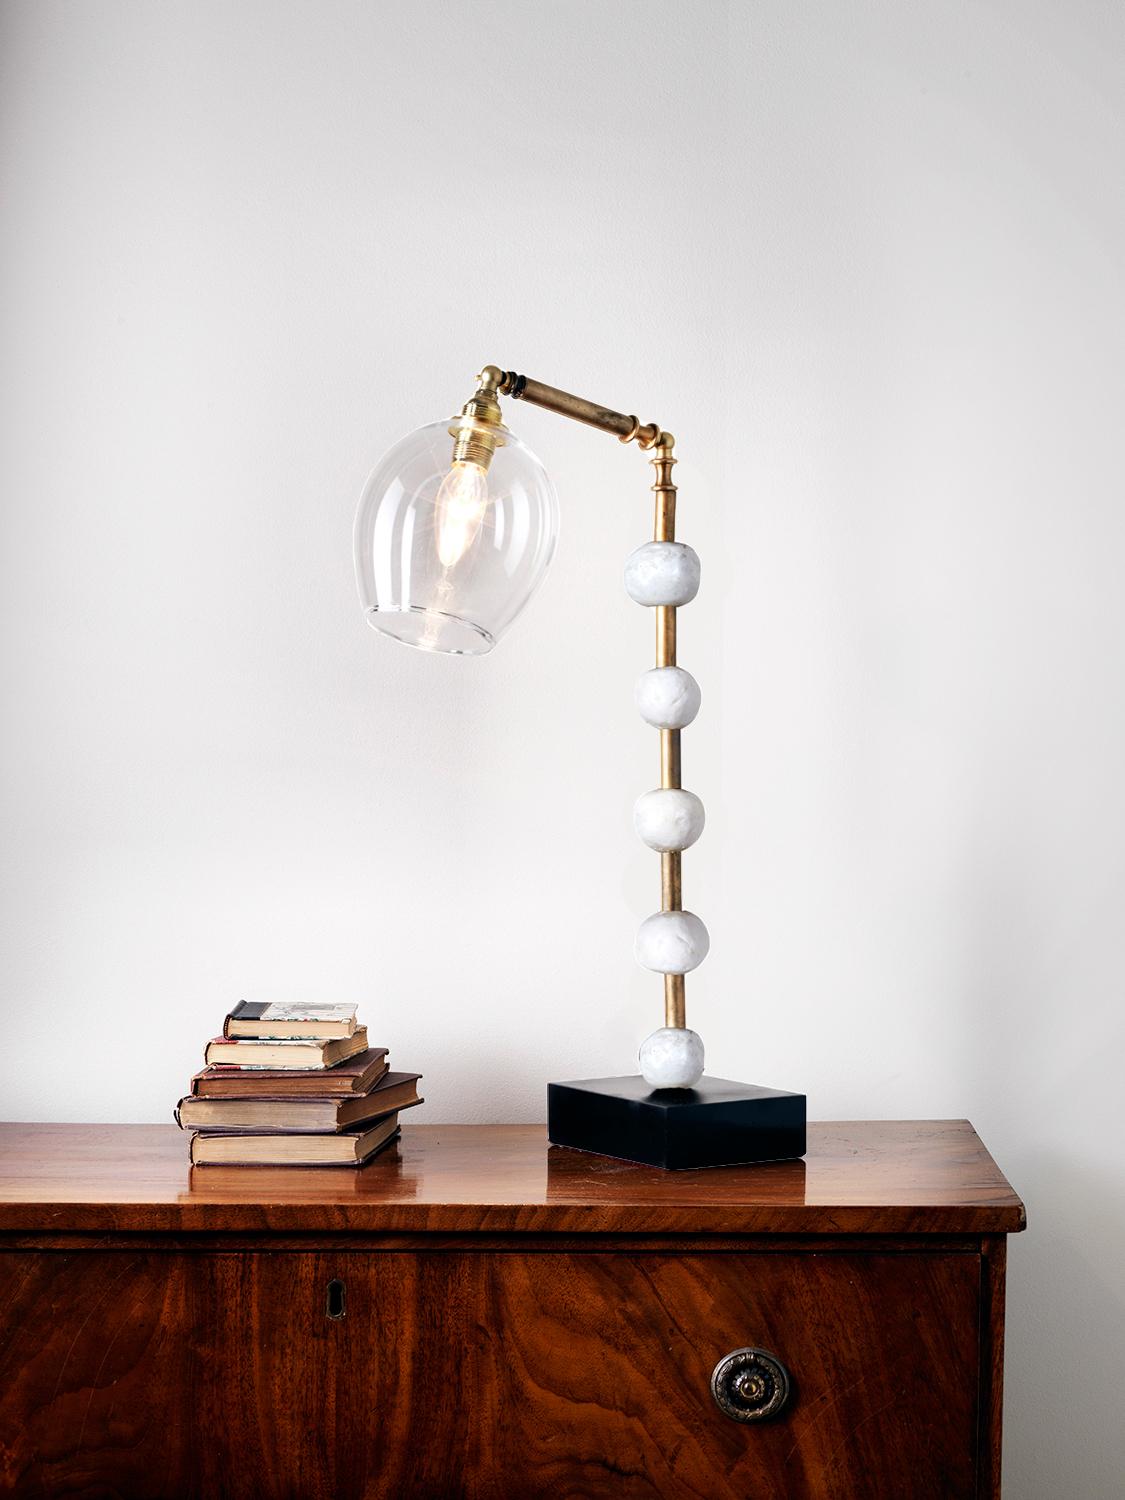 This contemporary Margit Wittig table lamp is mounted on a slate base and features multiple white resin handcrafted spheres. Each element is hand patinated to increase tonal contrast and enhance the surface texture.

This statement piece which